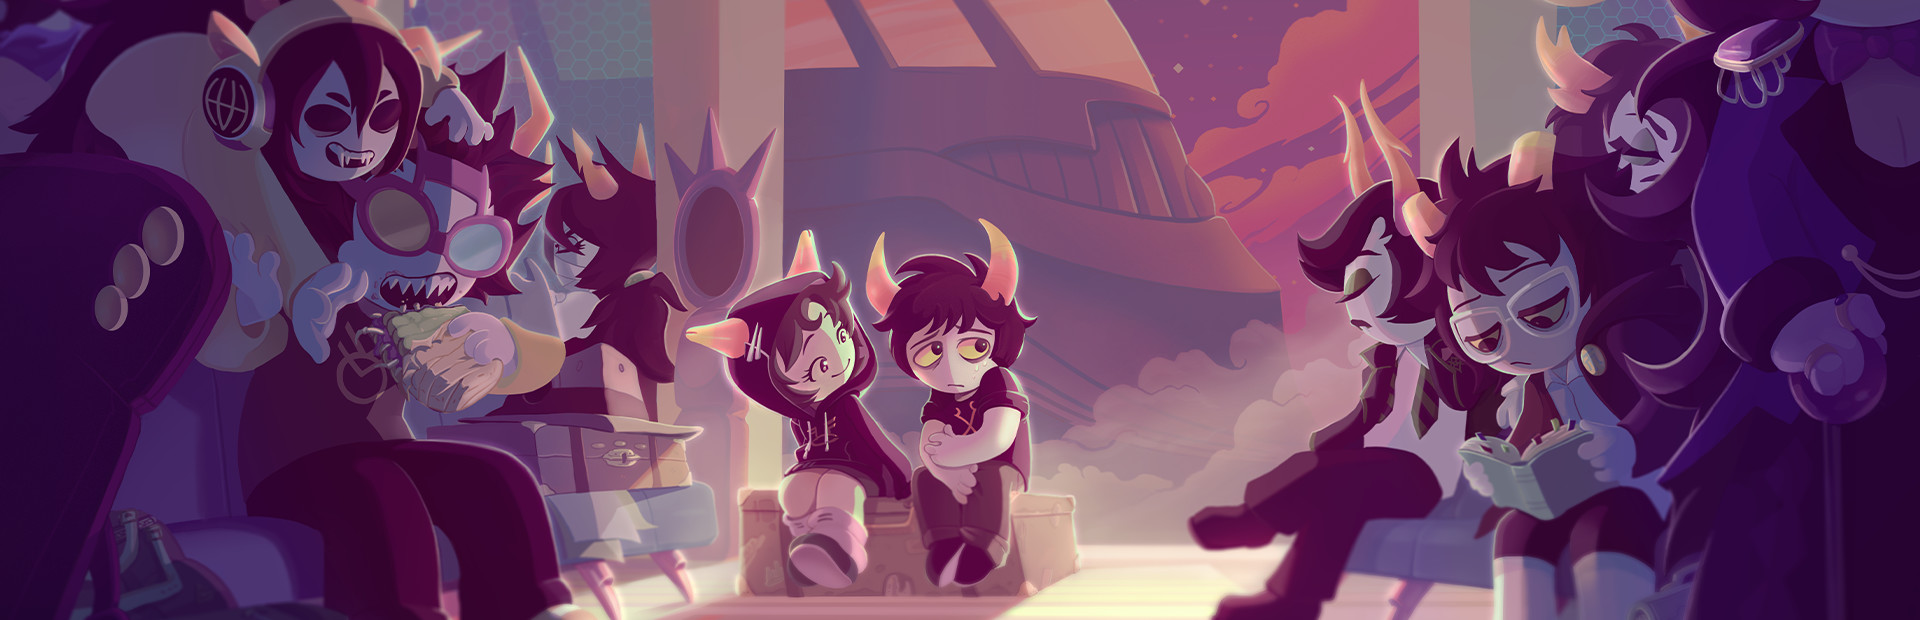 HIVESWAP: ACT 2 cover image